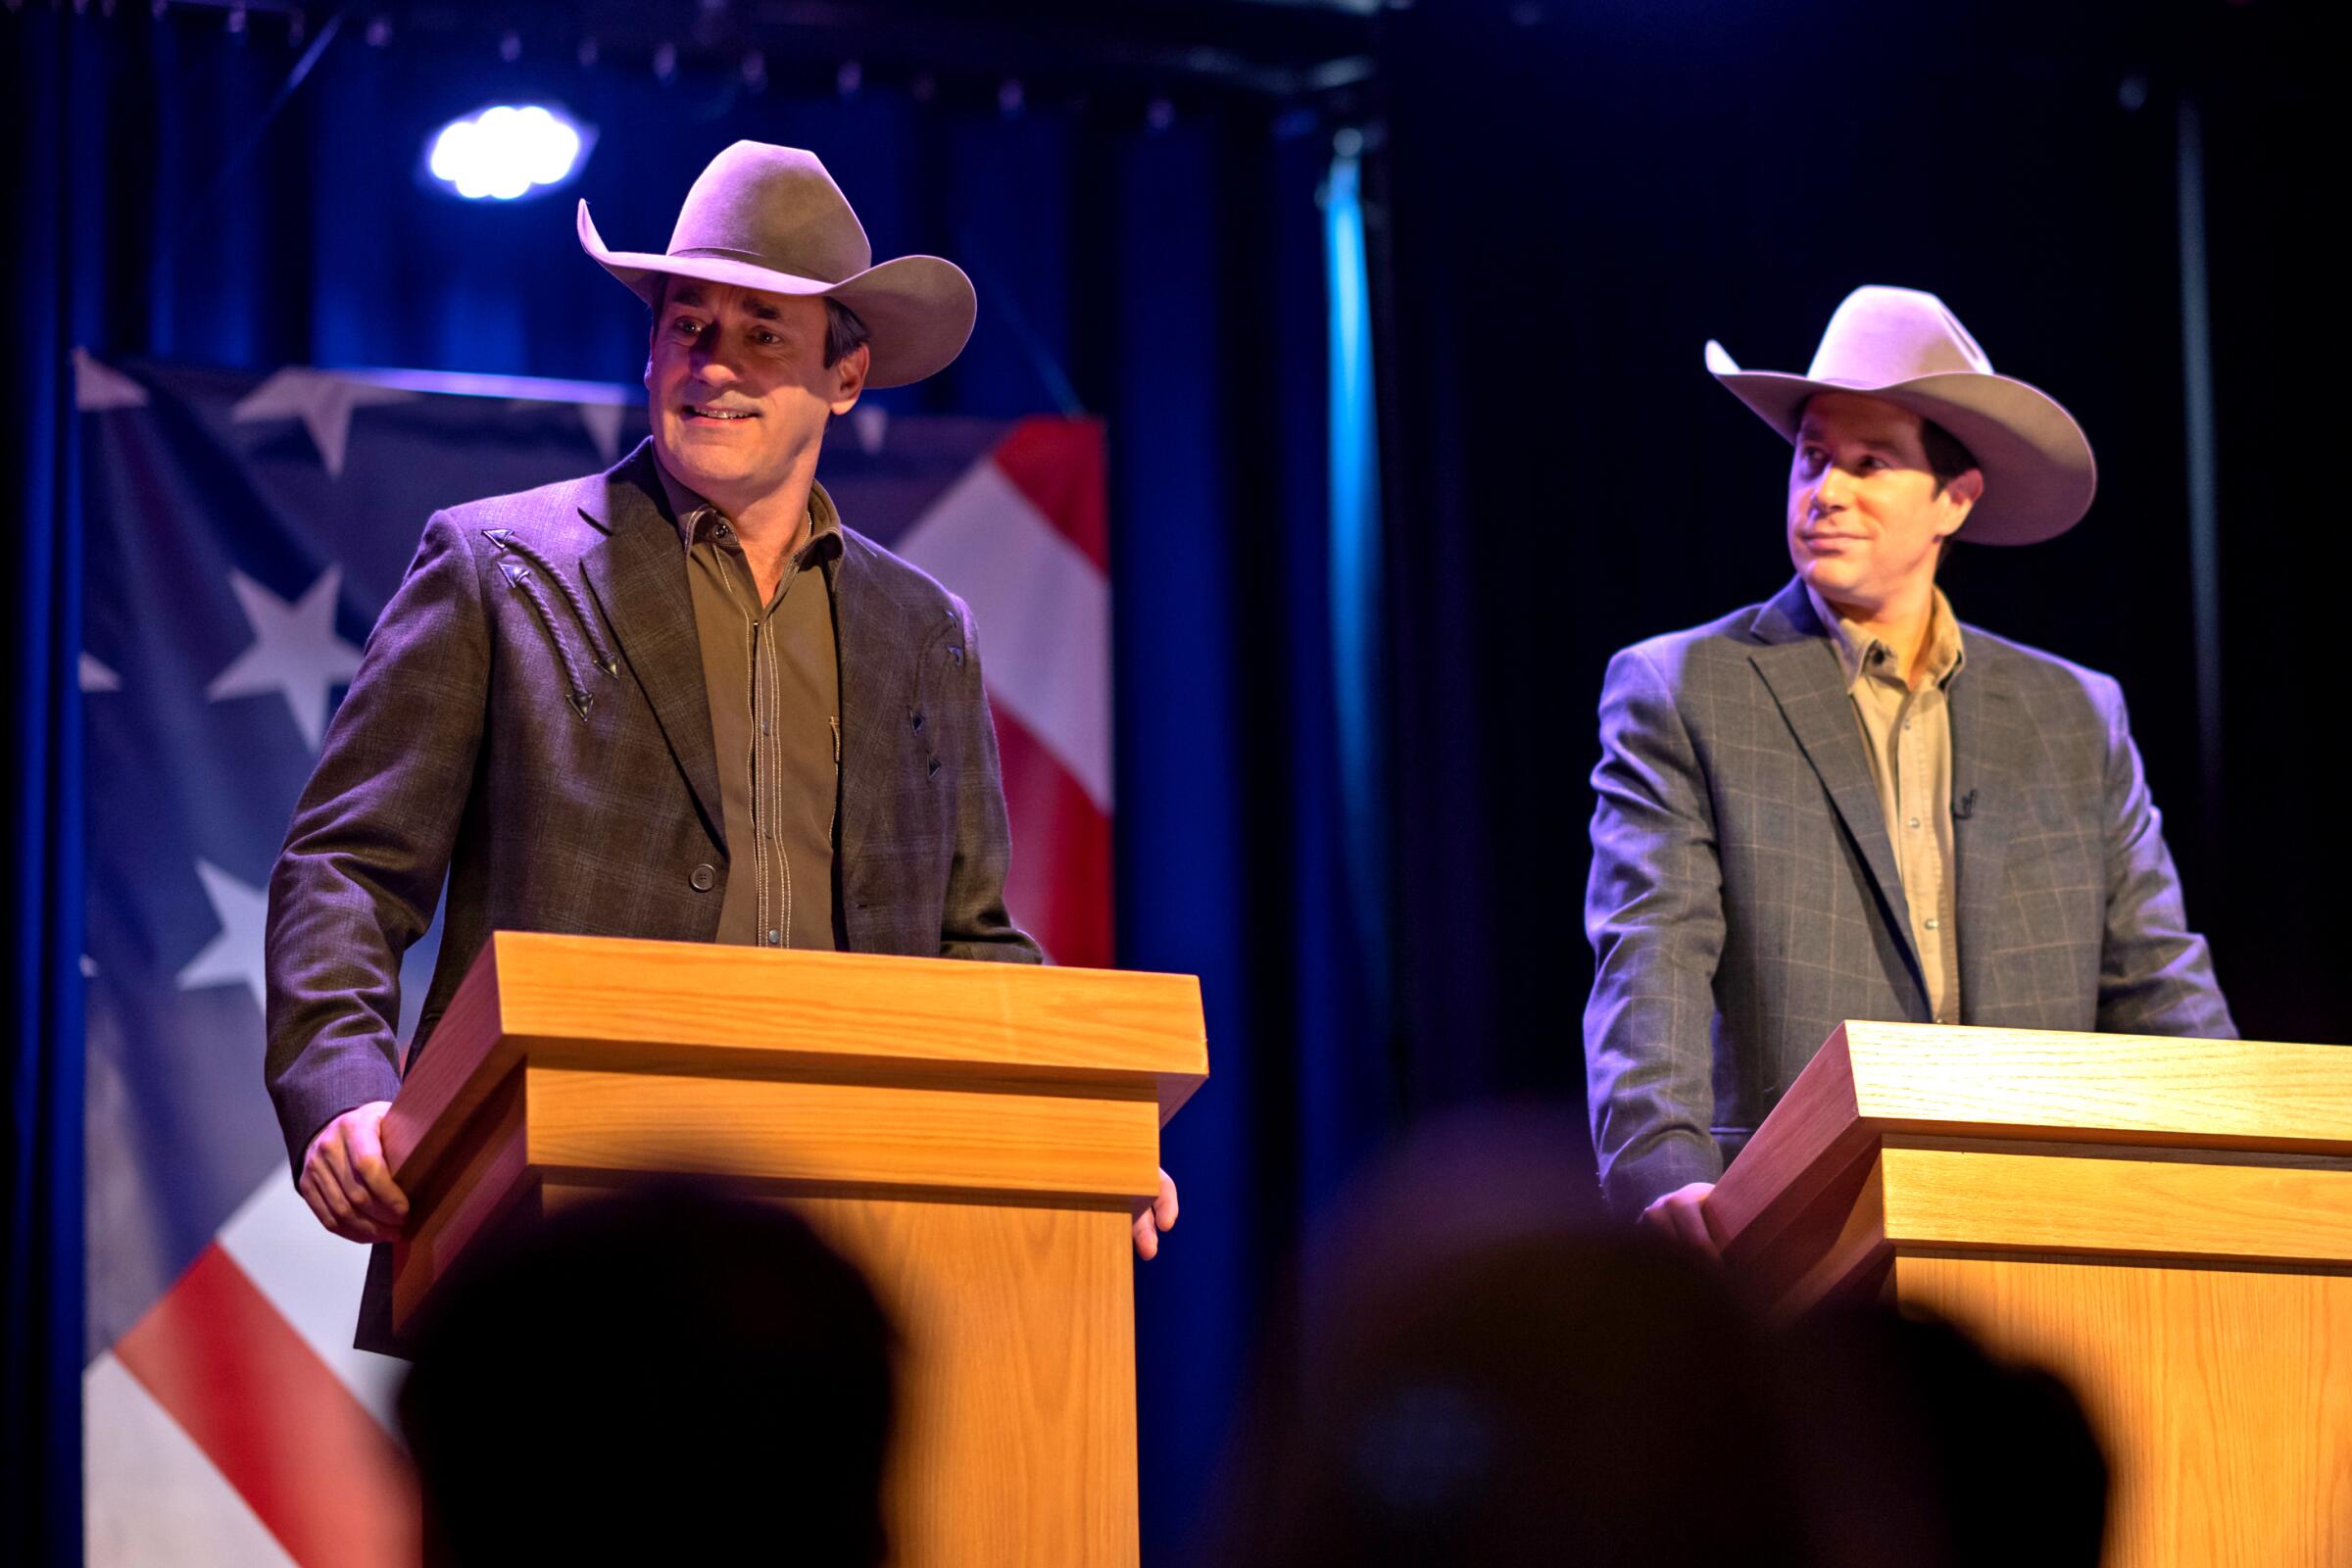 Two men, dressed alike in cowboy hats, stand at podiums in a scene from "Fargo" Season 5.